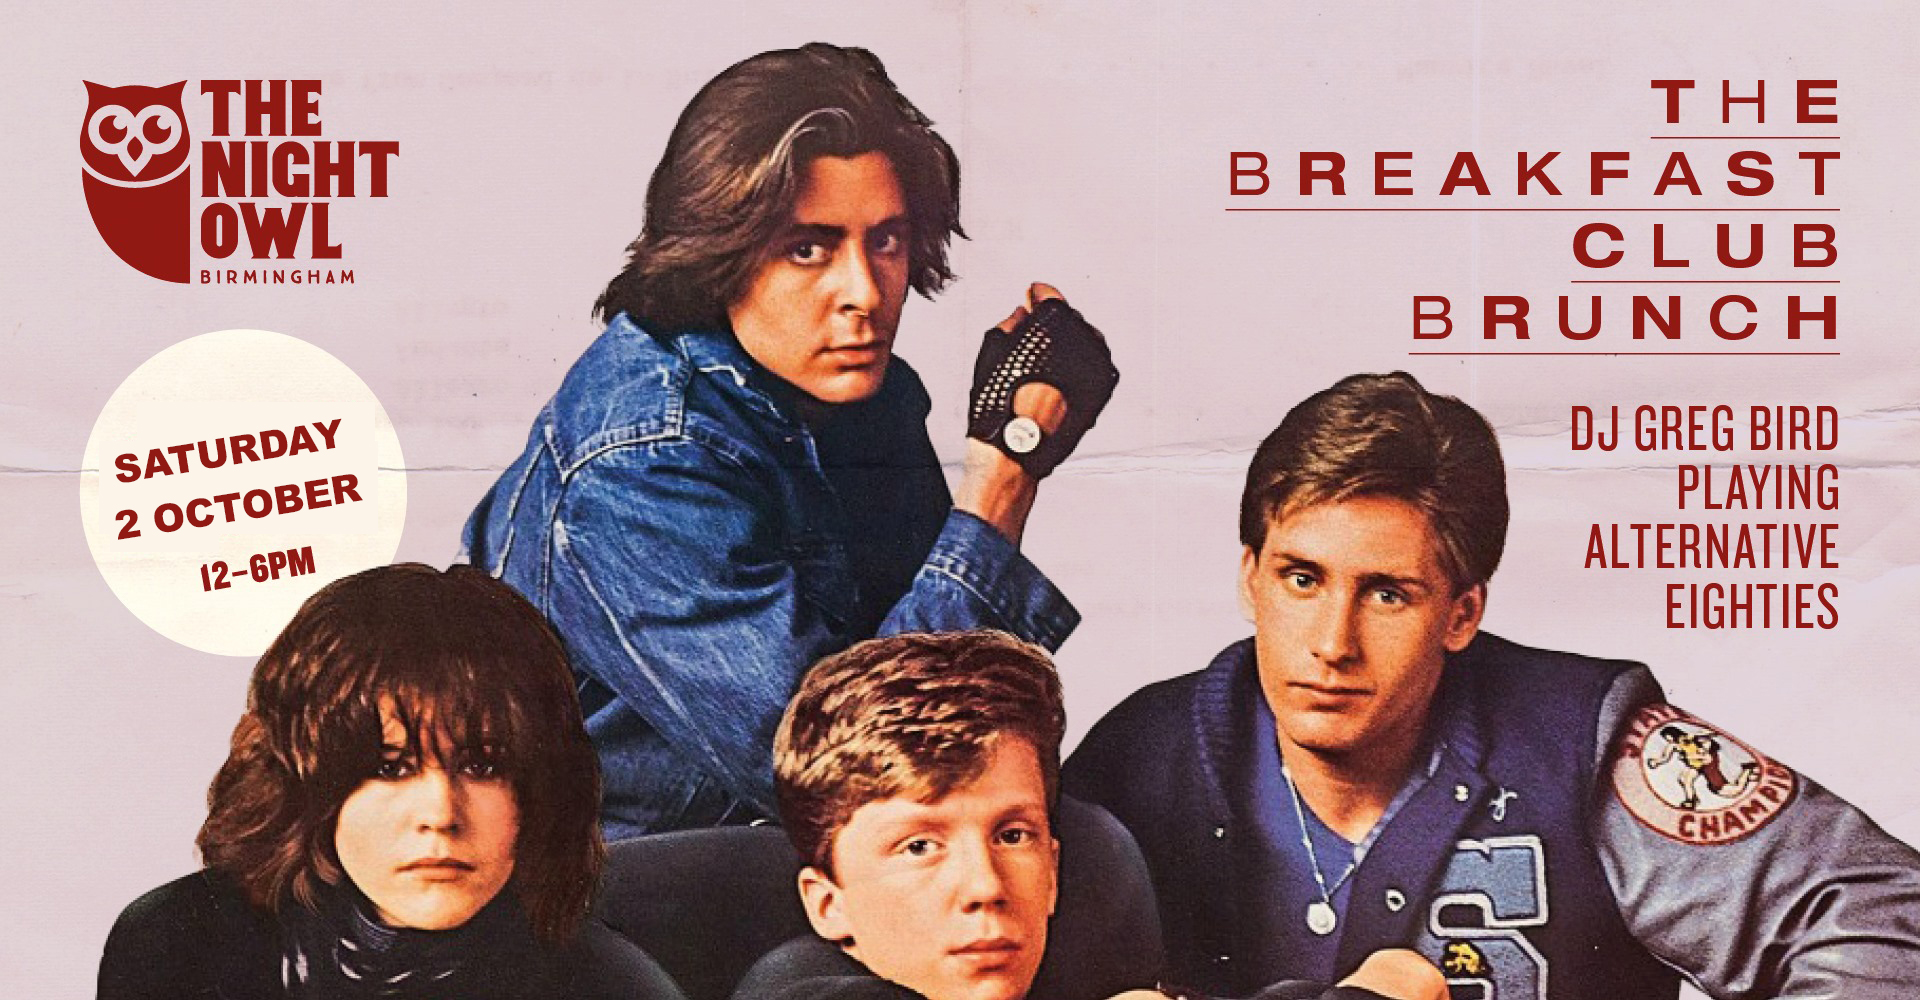 The Breakfast Club at The Night Owl Event Poster